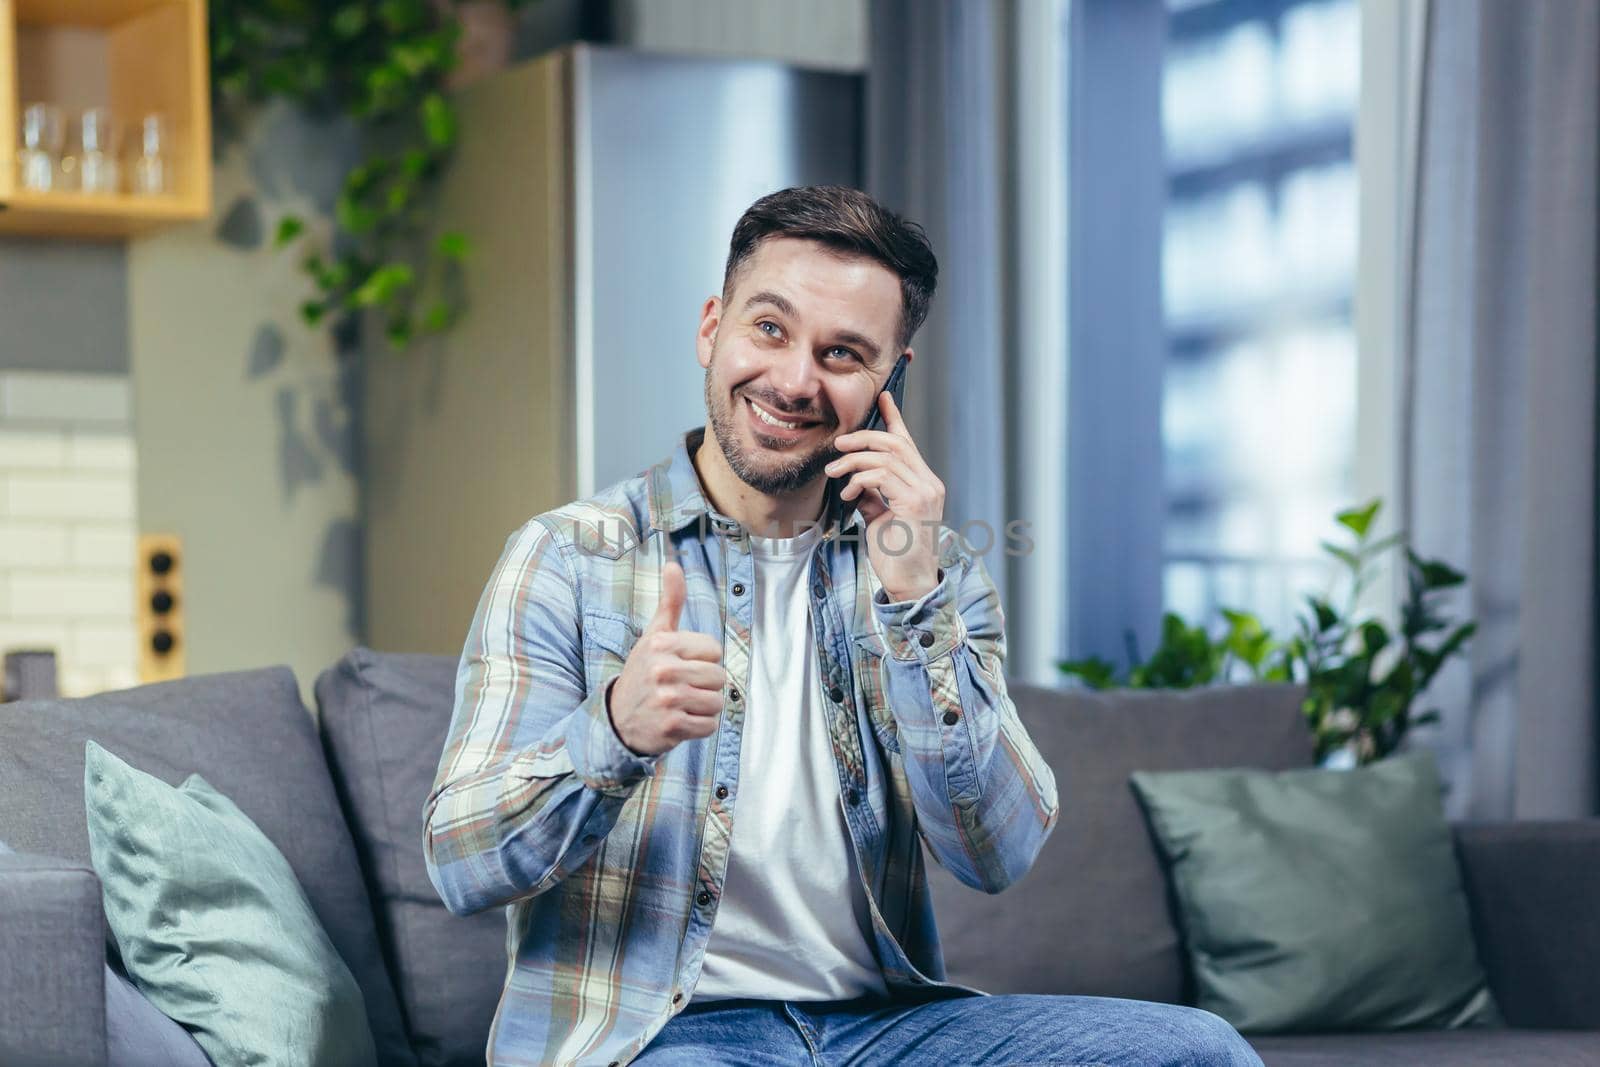 Happy and cheerful man at home sitting on the couch smiling and talking on the phone